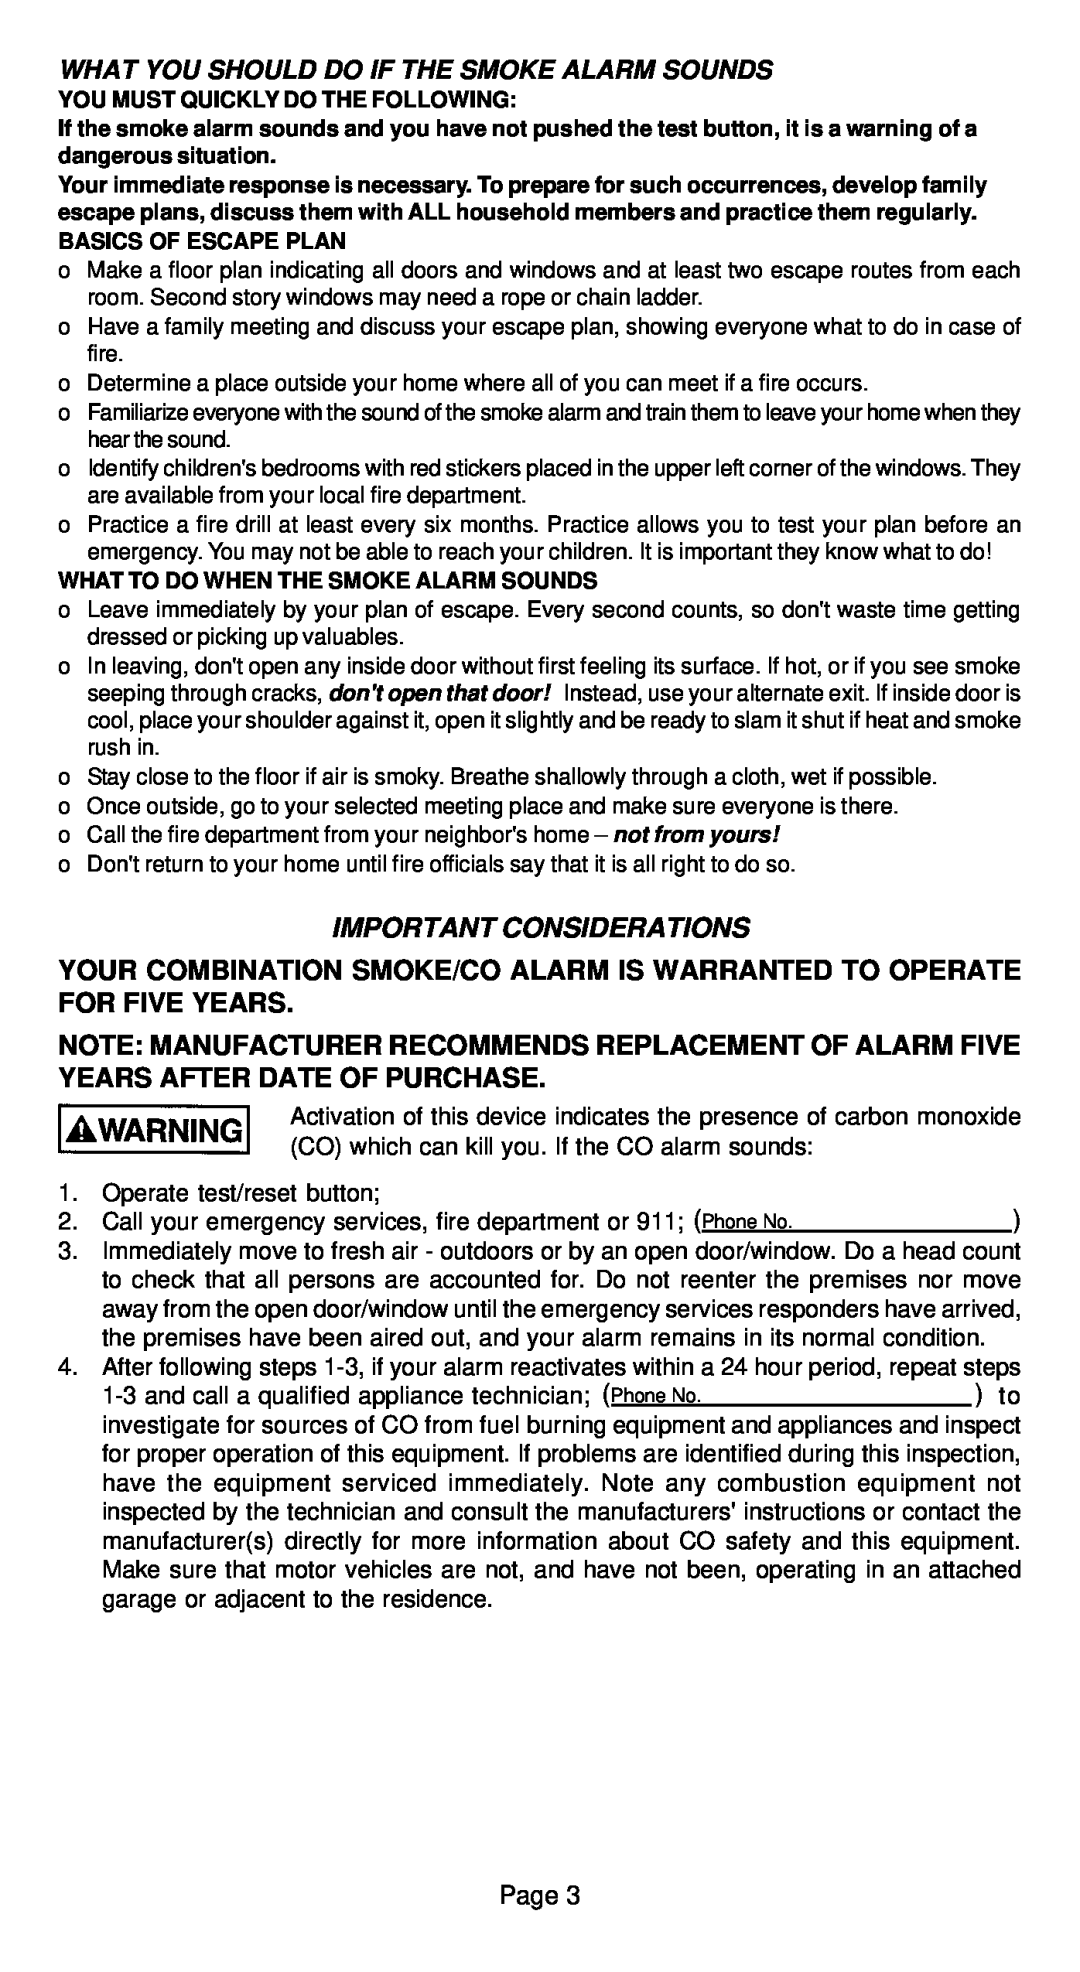 Universal Electronics CD-9775 manual What You Should Do If The Smoke Alarm Sounds, Important Considerations 